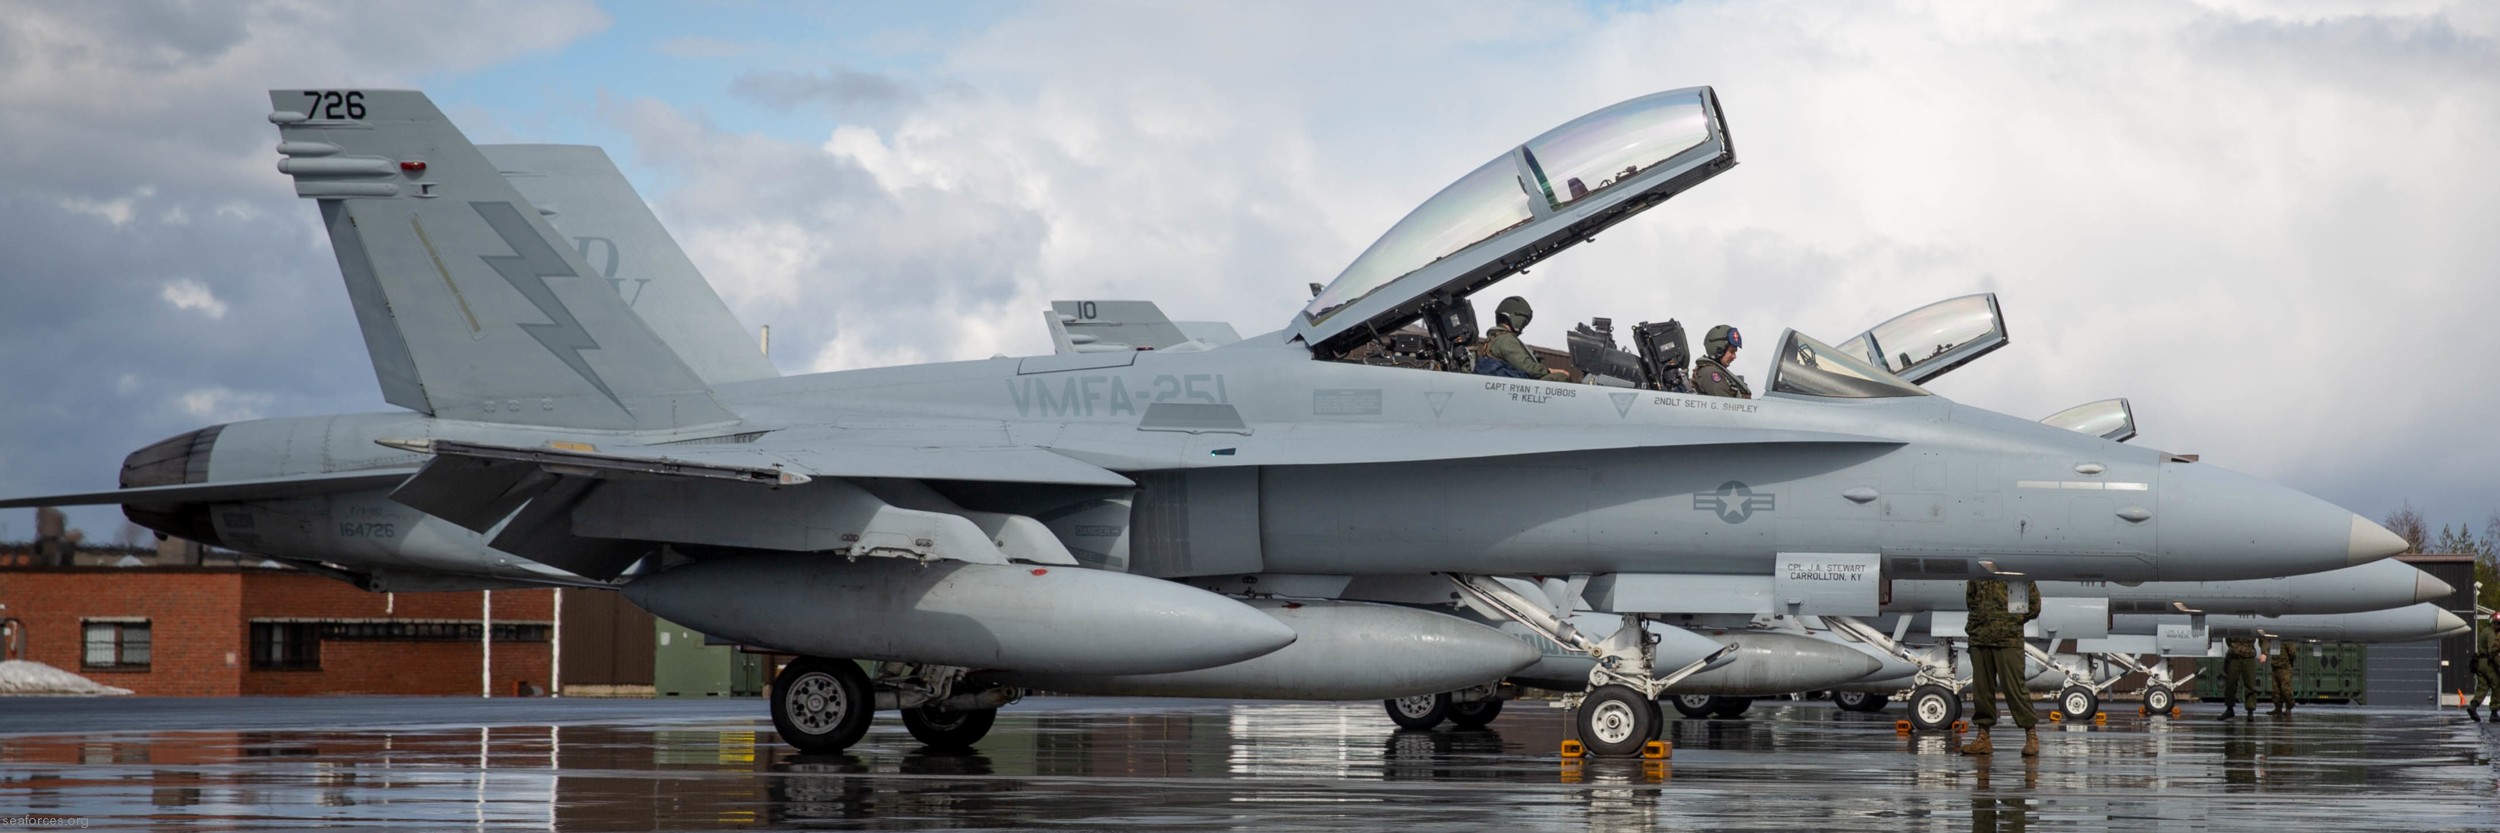 vmfa-251 thunderbolts marine fighter attack squadron f/a-18d hornet 89 exercise bold quest finland